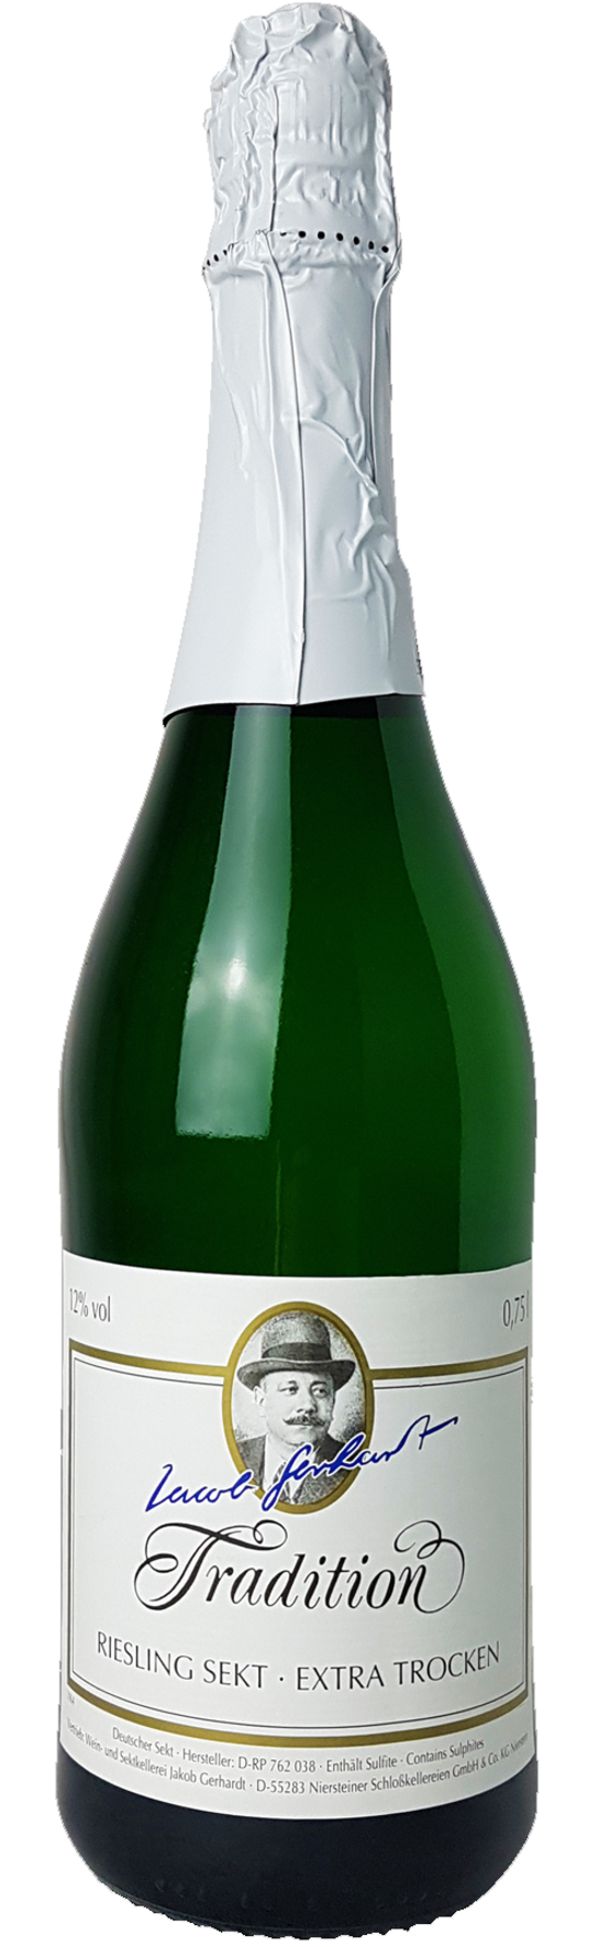 0,75l Sekt Riesling Tradition extra dry